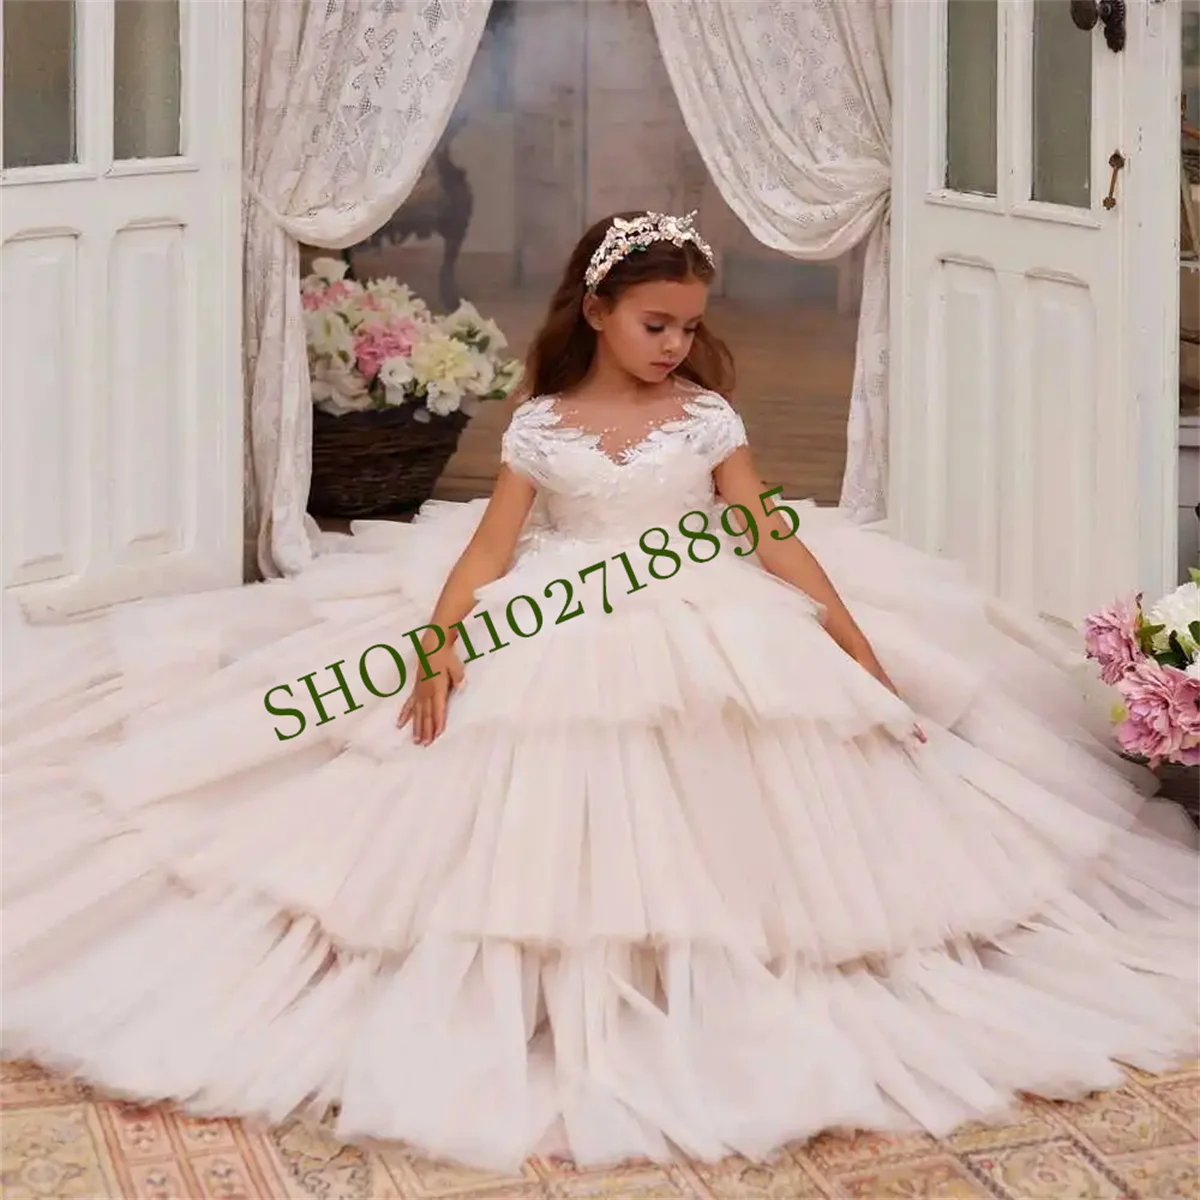 

Elegant Girls Flower Girl Dresses Tiered Ruffles Pageant First Communion Dress Kids Sequined Lace Wedding Party Gowns